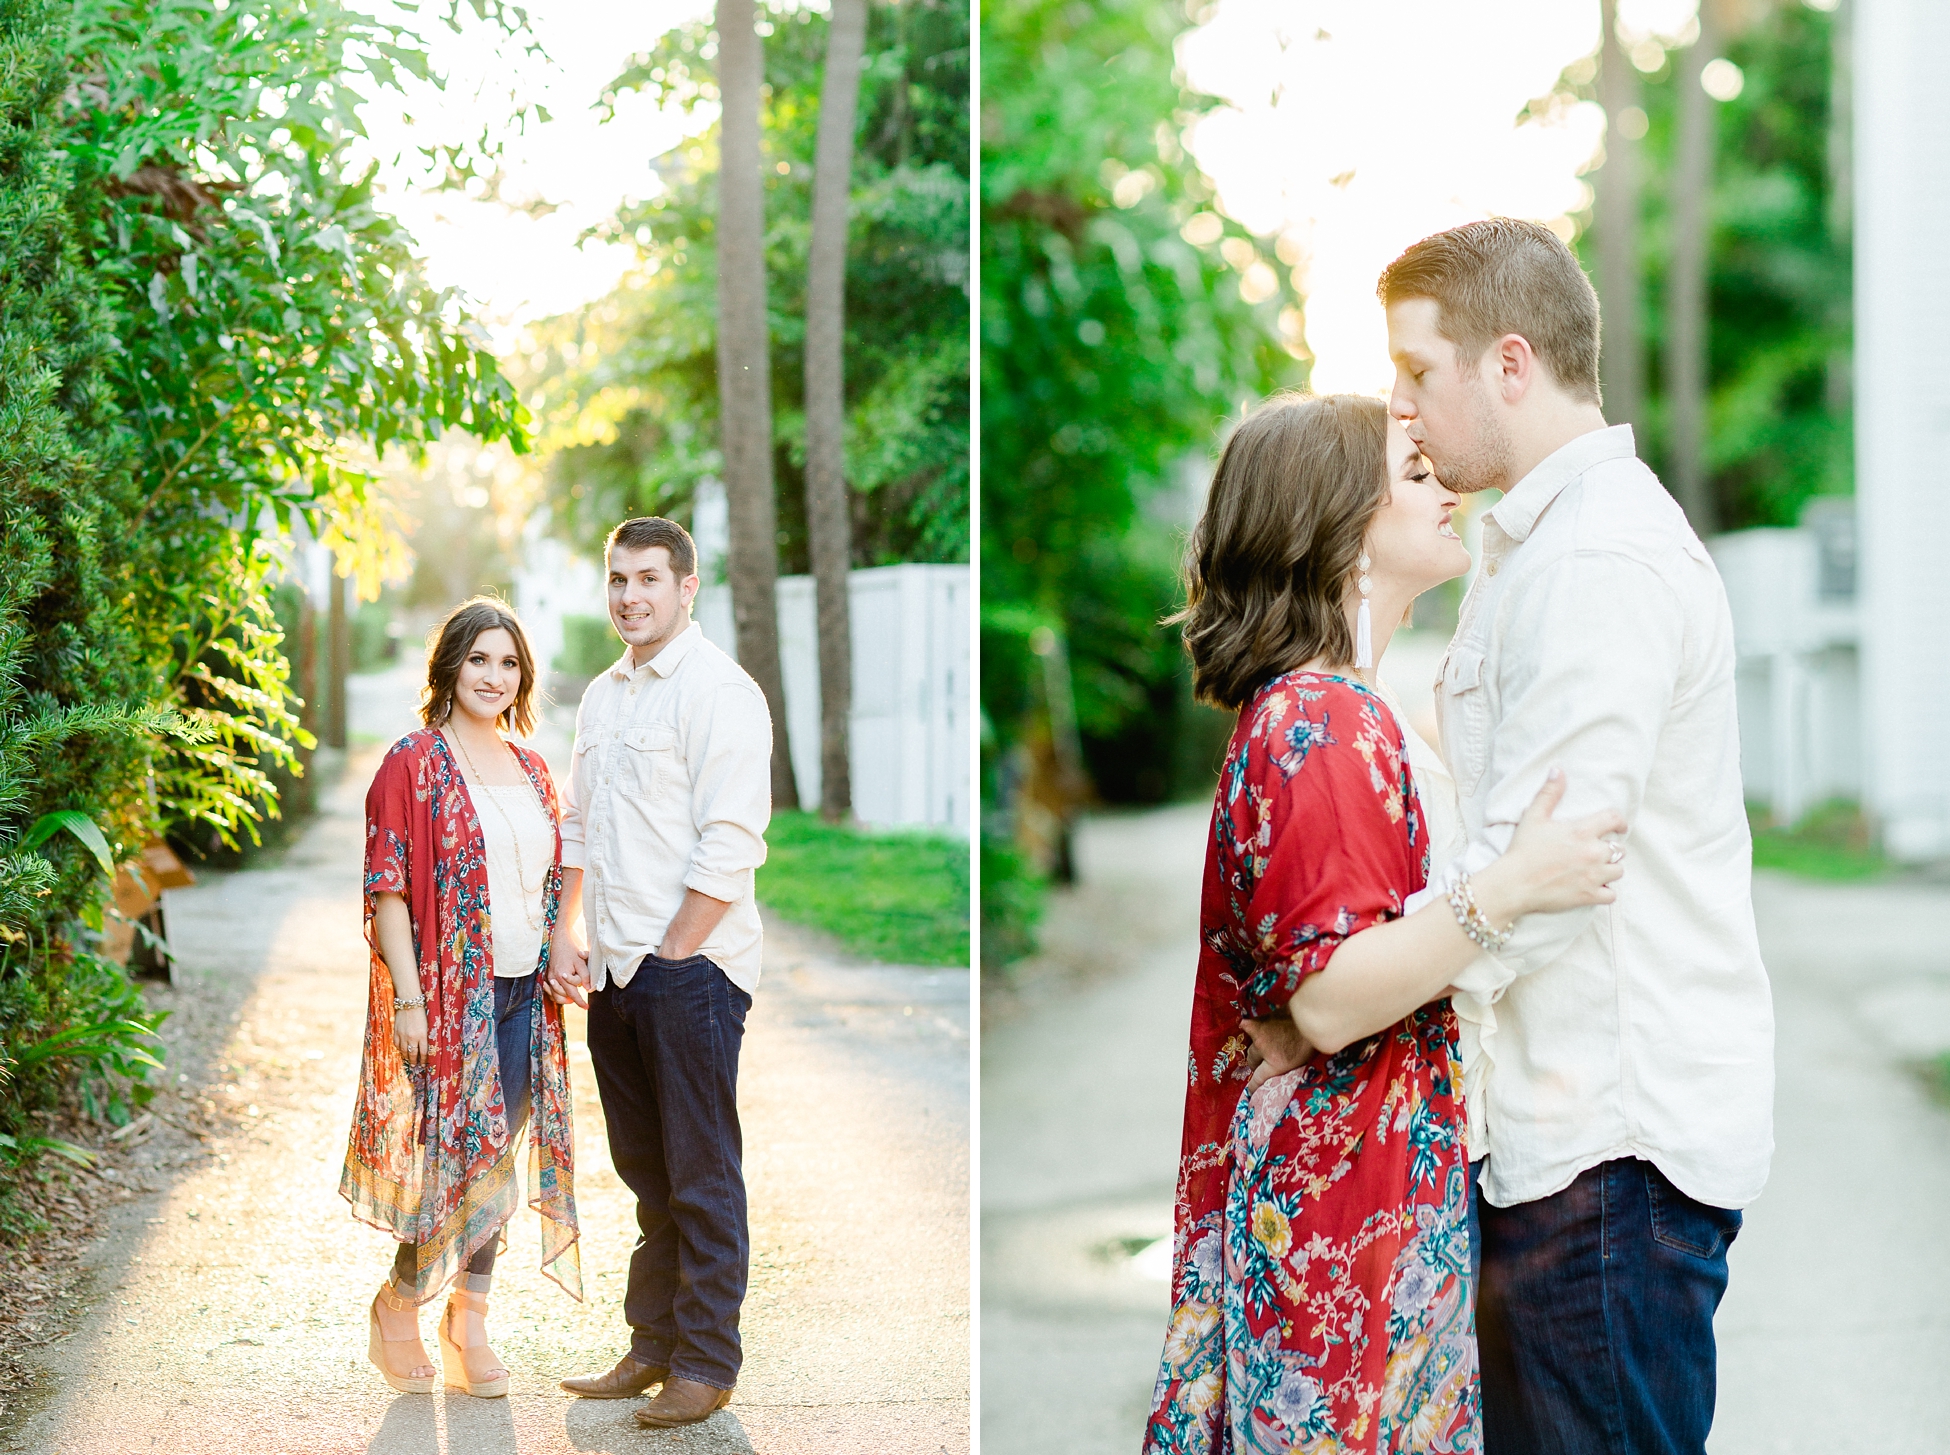 Old Hyde Park Engagement | © Ailyn La Torre Photography 2018